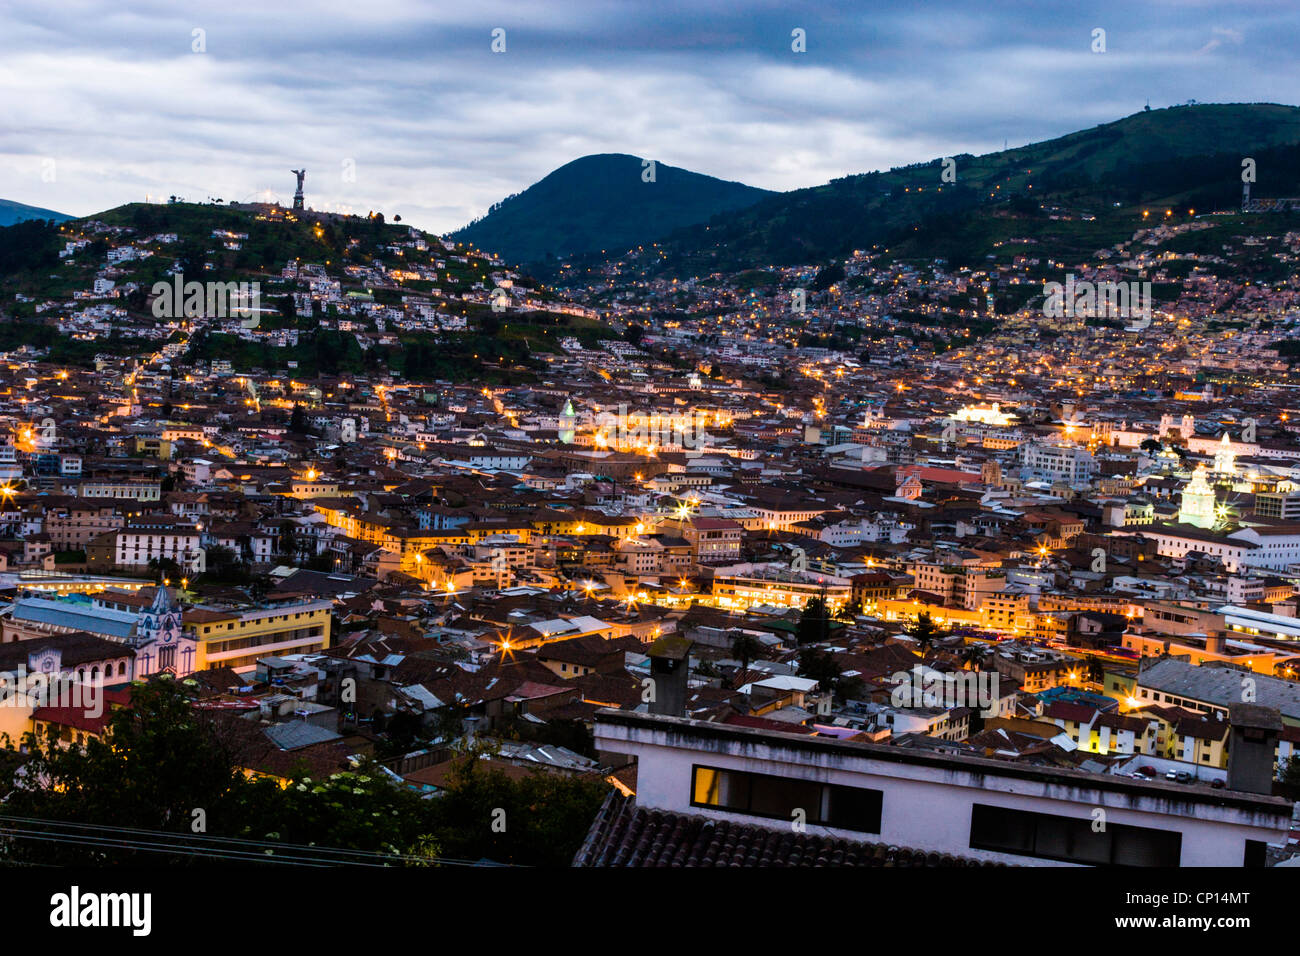 Quito Ecuador at night, view of colonial city or old city Stock Photo